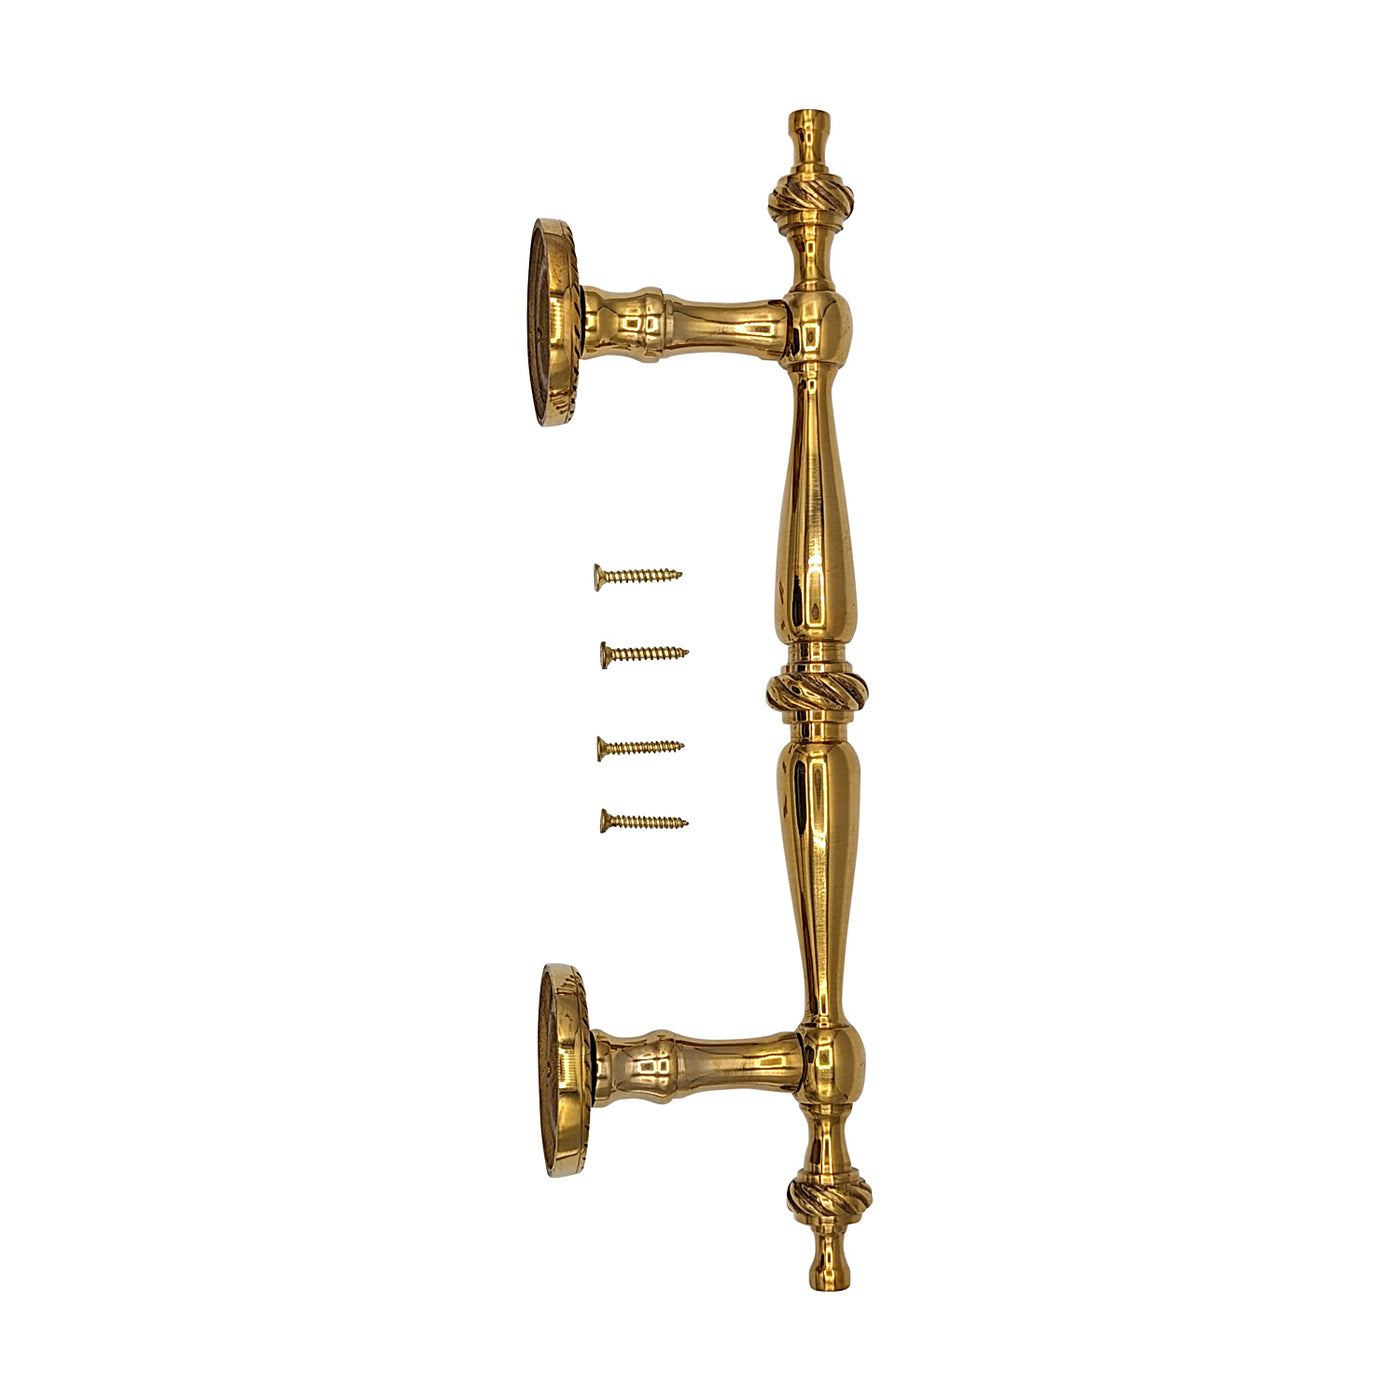 9 1/2 Inch Overall (6 Inch C-C) Solid Brass Georgian Style Handle (Several Finishes Available)